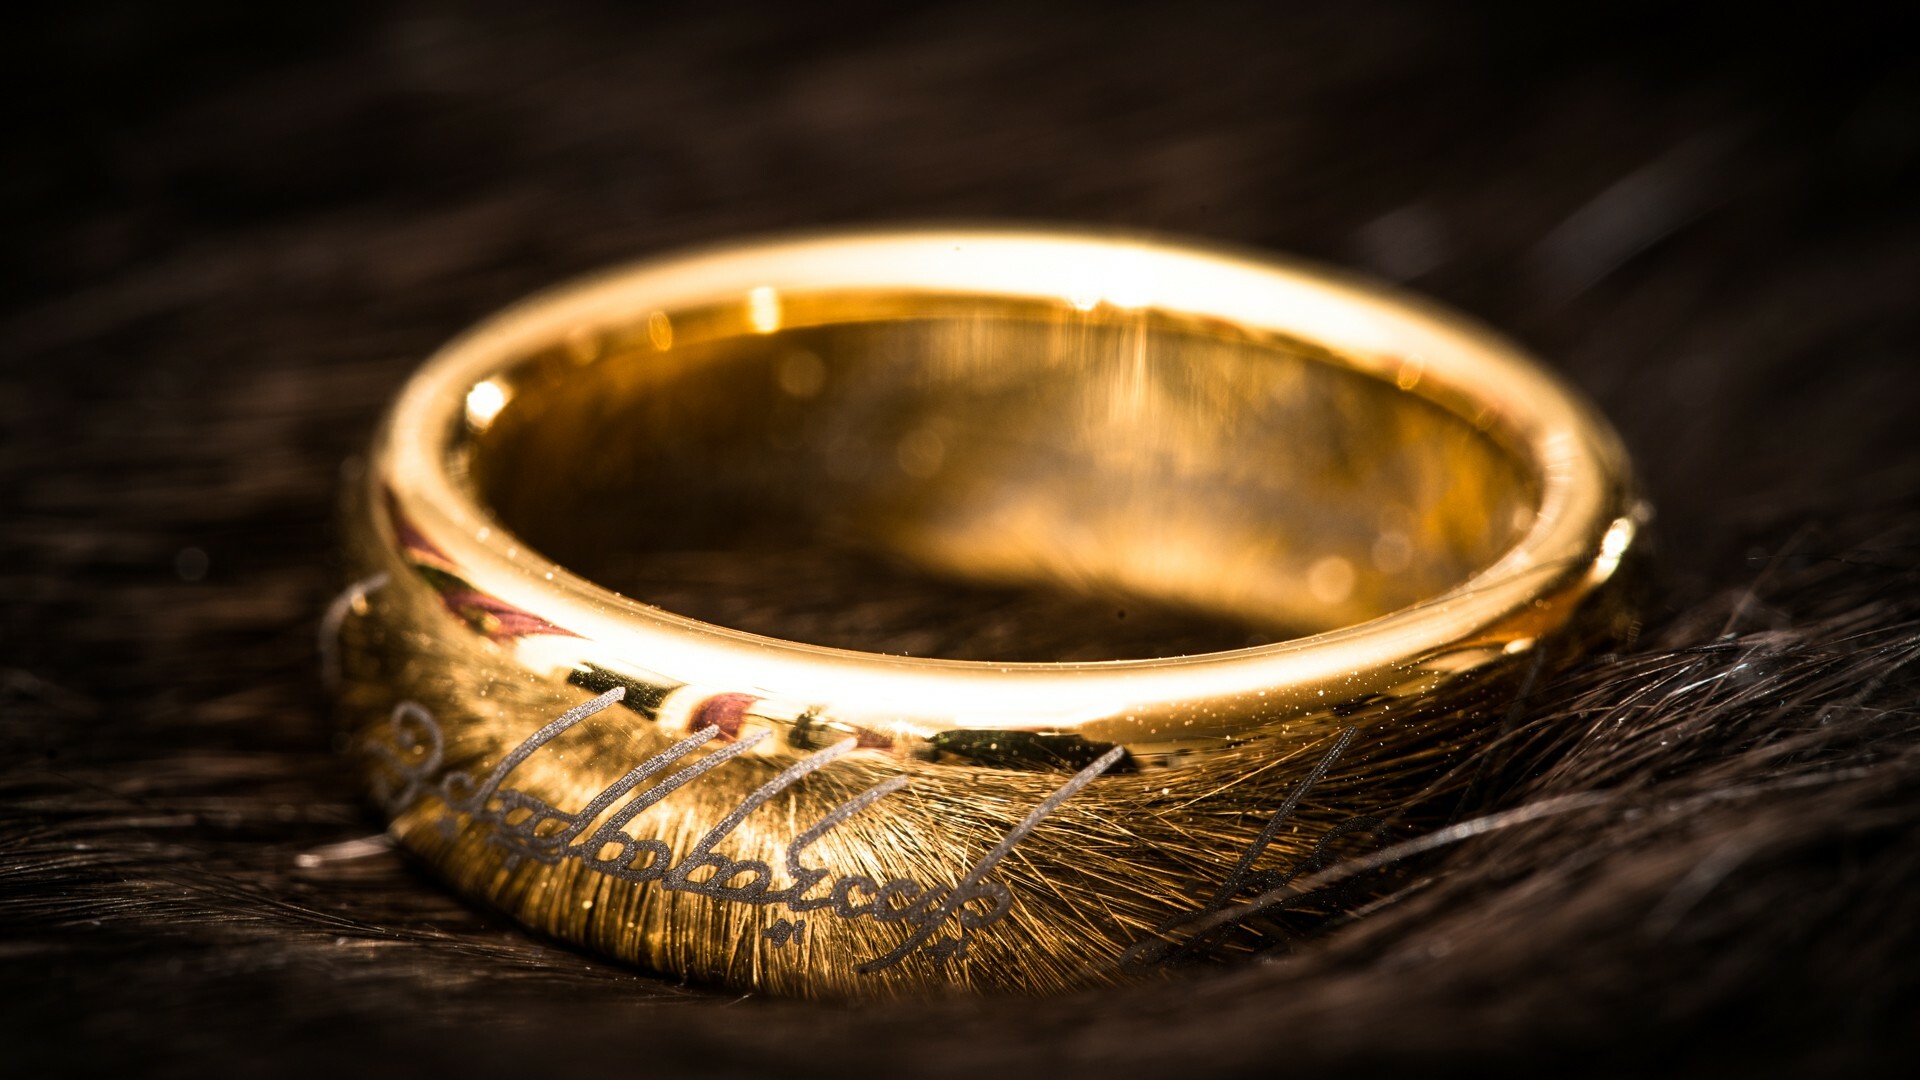 The Lord of the Rings: The One Ring, Its purpose was to control the wearers of the 19 other Rings at a distance. 1920x1080 Full HD Wallpaper.